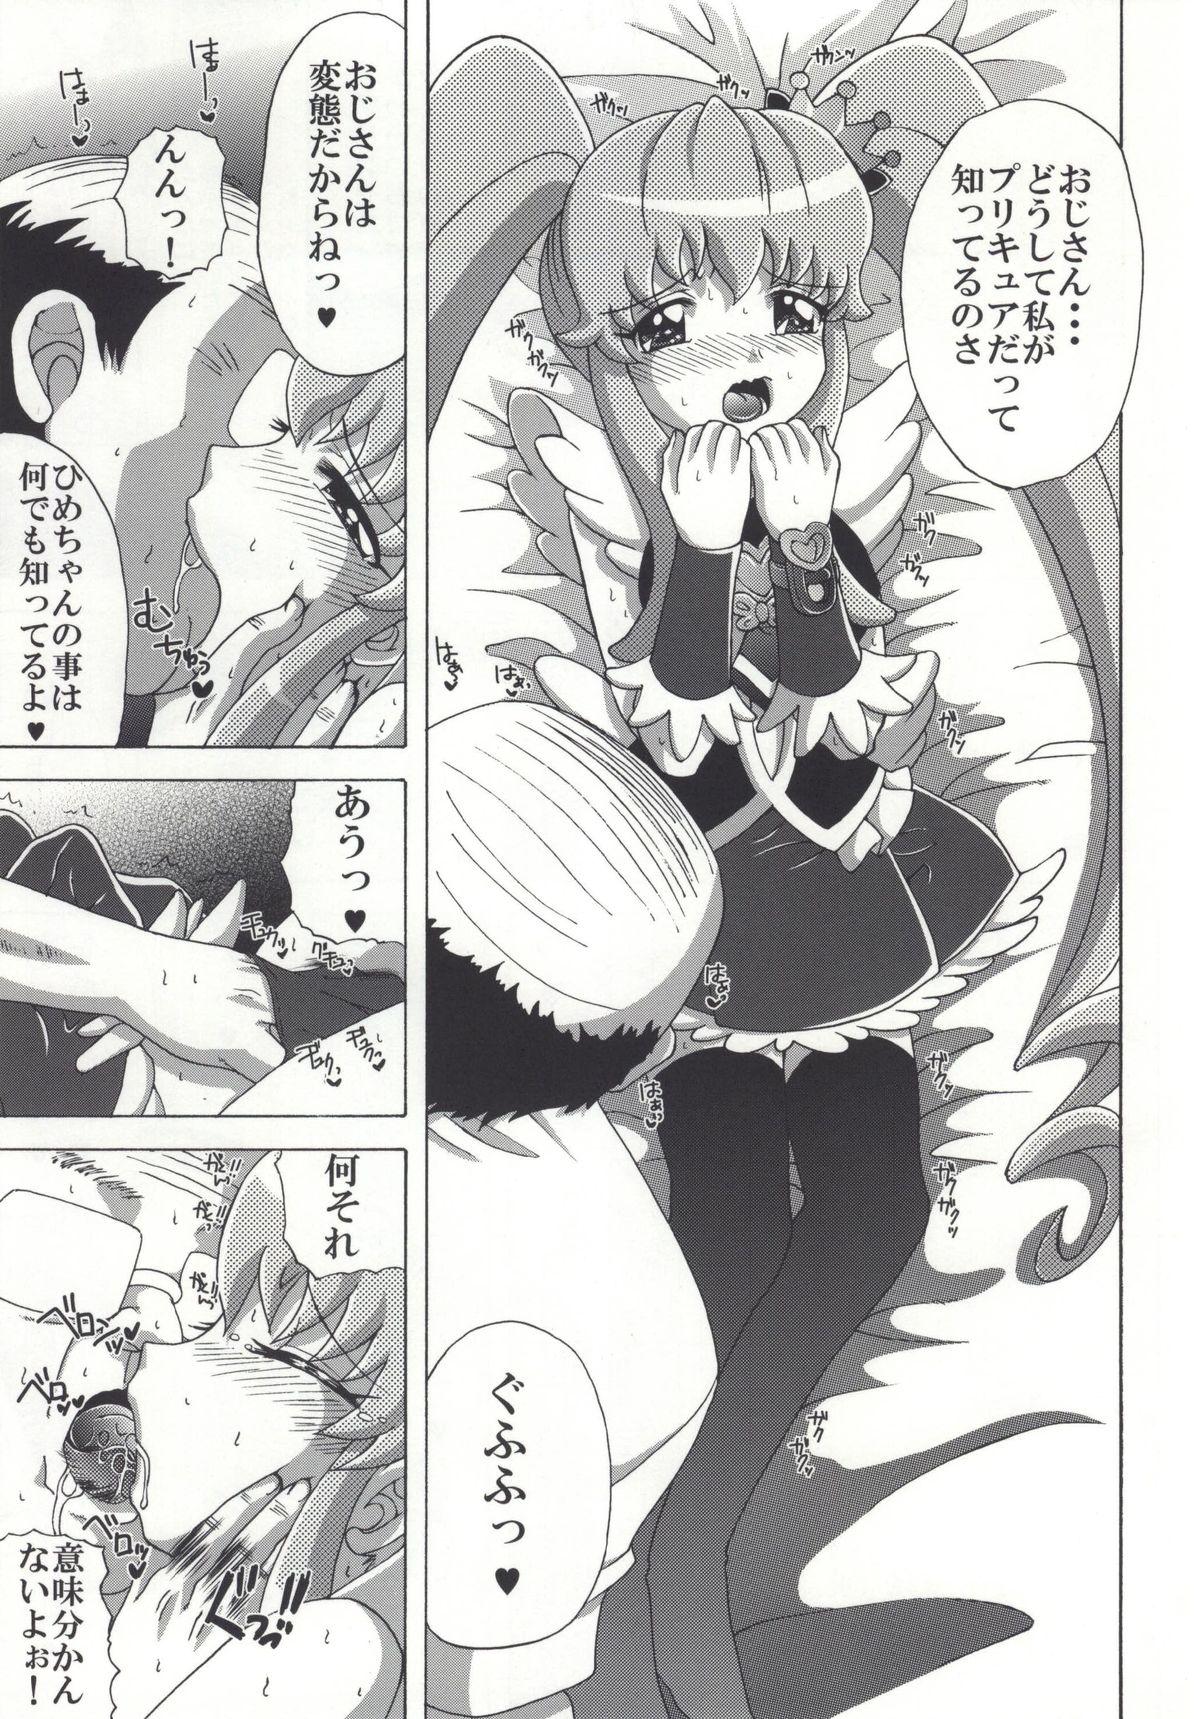 Tinder Hime-chan no Tomodachi - Happinesscharge precure Collar - Page 8